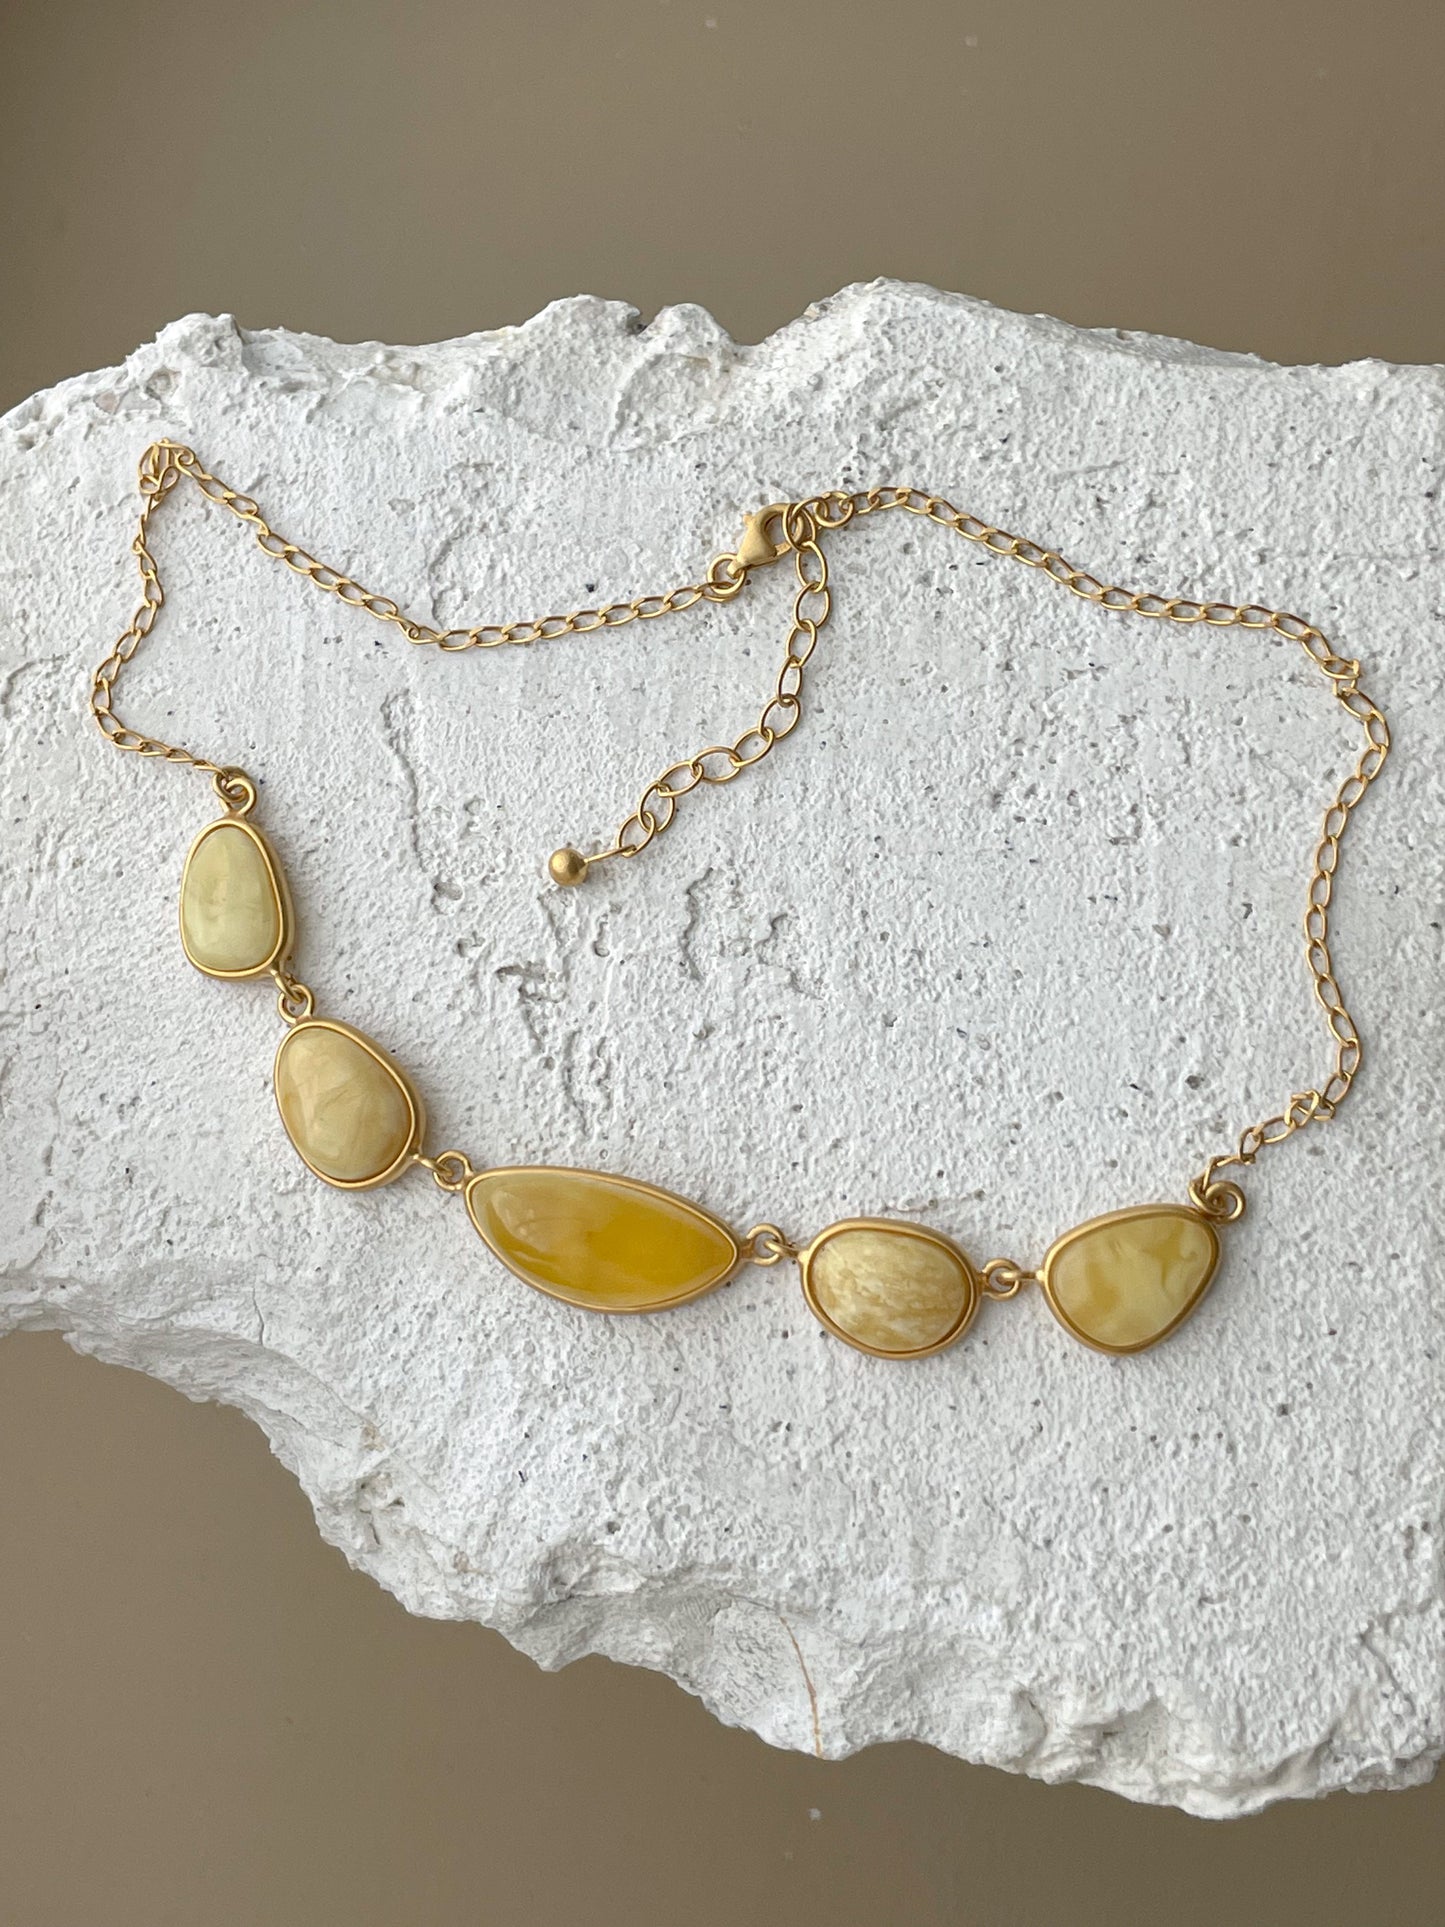 Amber necklace, gold plated sterling silver with natural amber